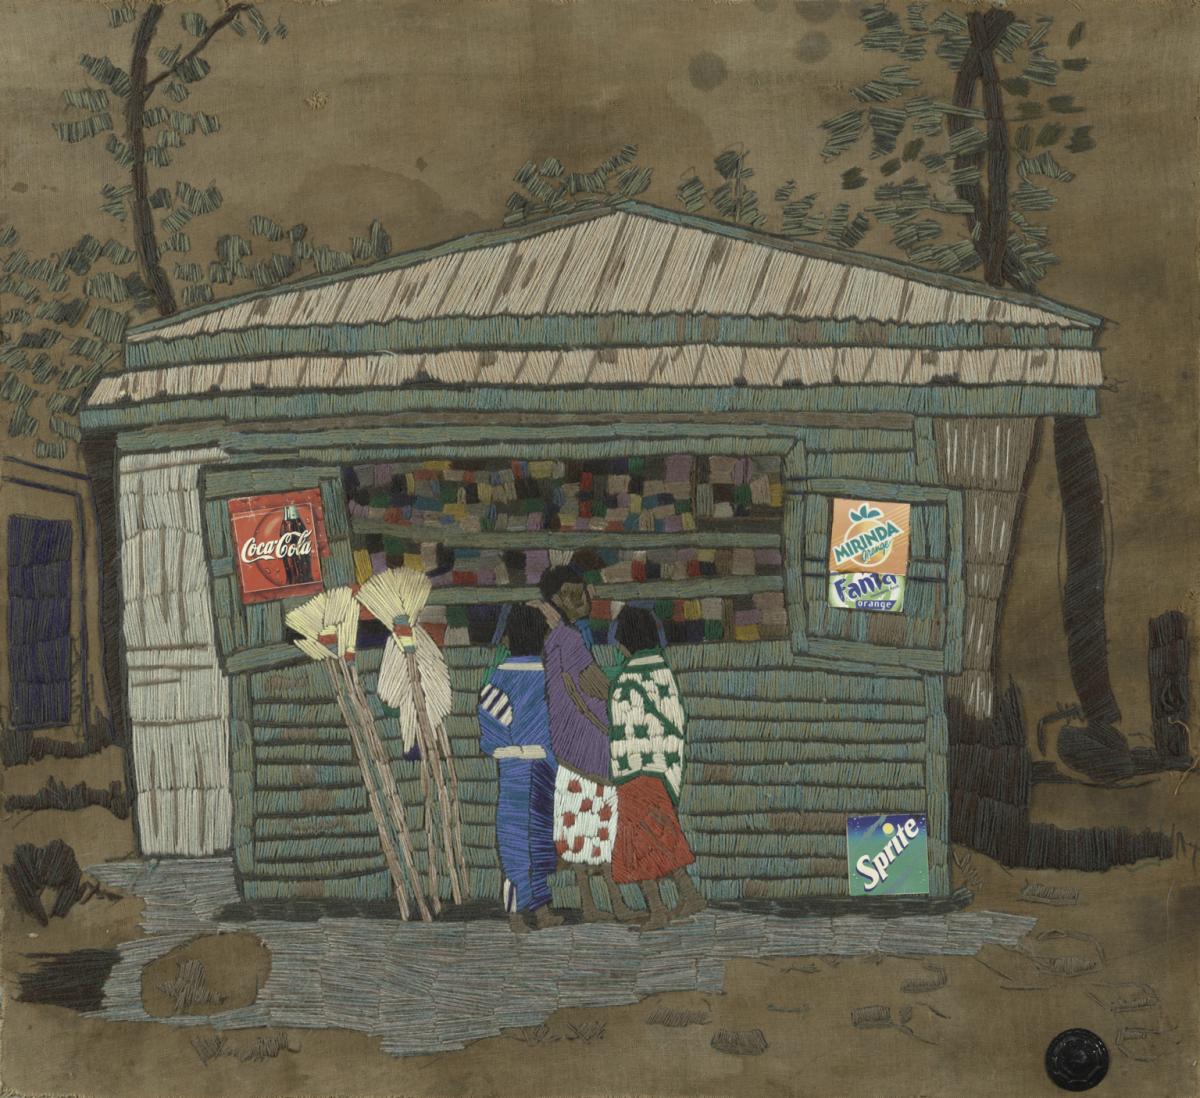 Artwork made of burlap and yard depicting figures at a food stand in Ethiopia